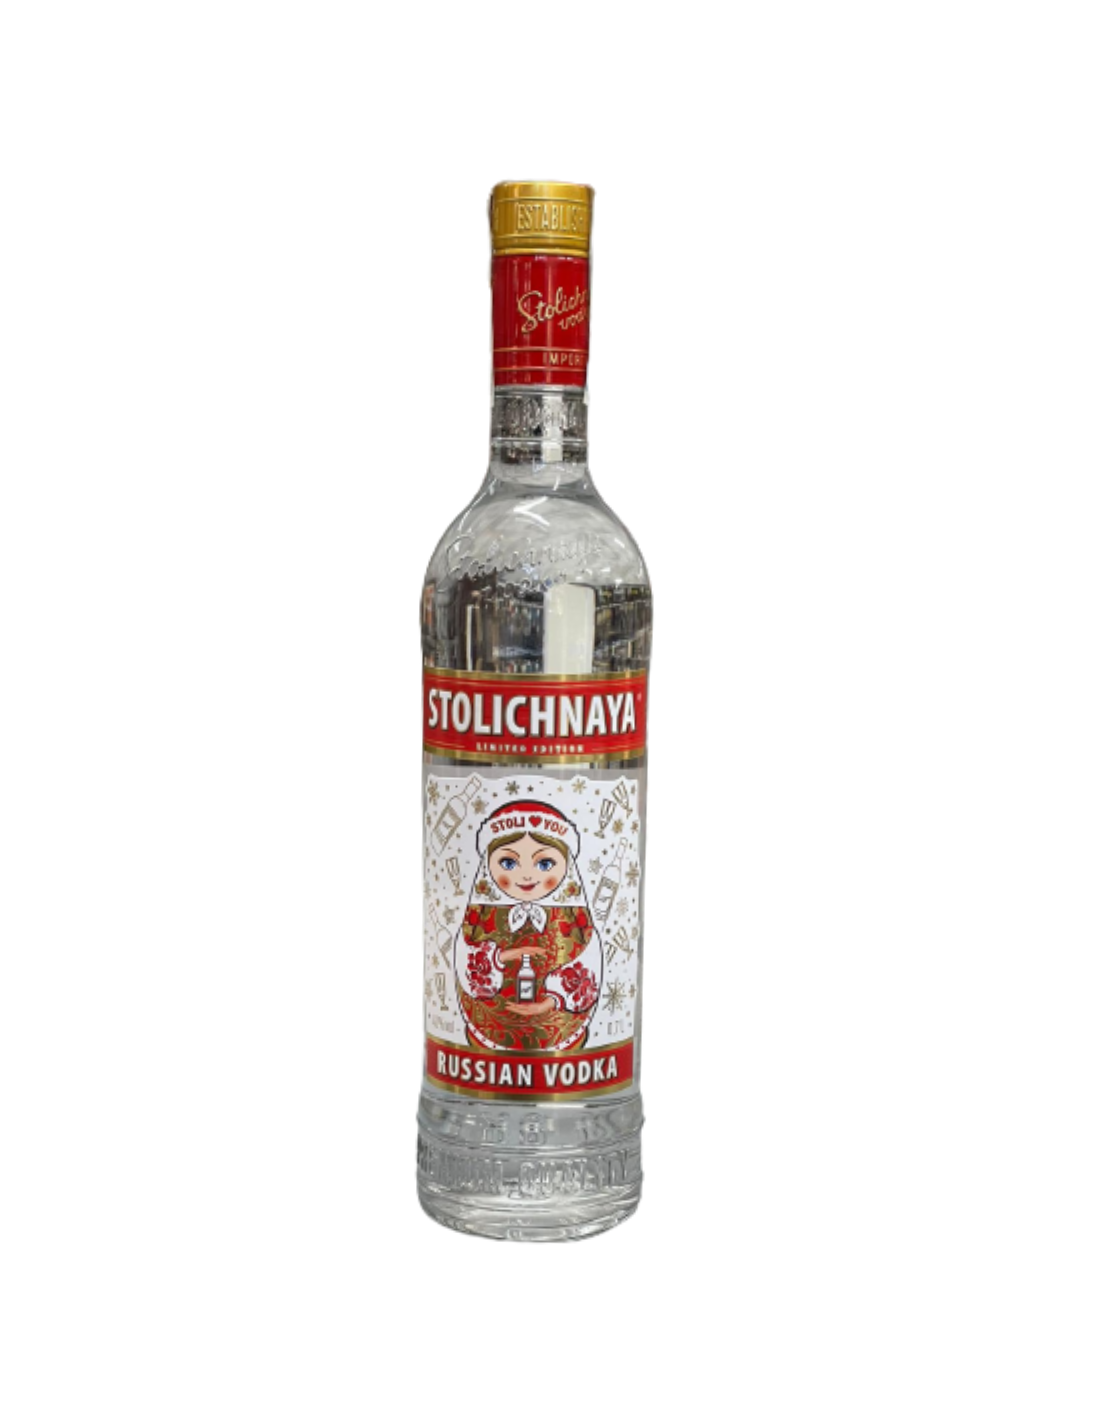 Vodca StoLichnaya Love You Limited Edition, 0.7L, 40% alc., Rusia alcooldiscount.ro